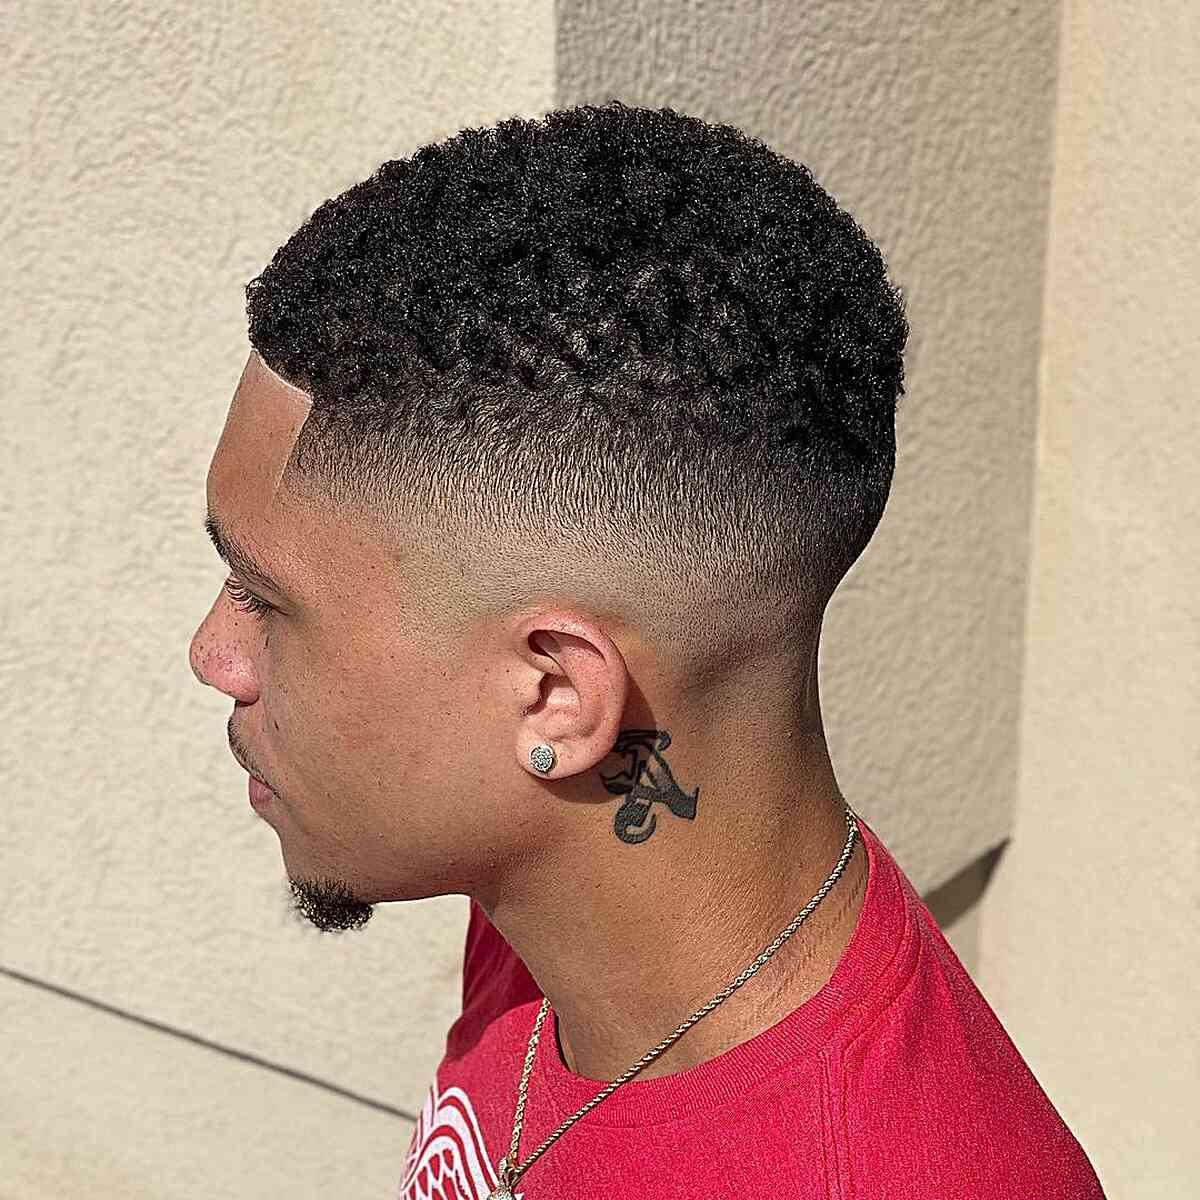 Clean Line Up and Bald Fade Haircut for Men with Thick Hair